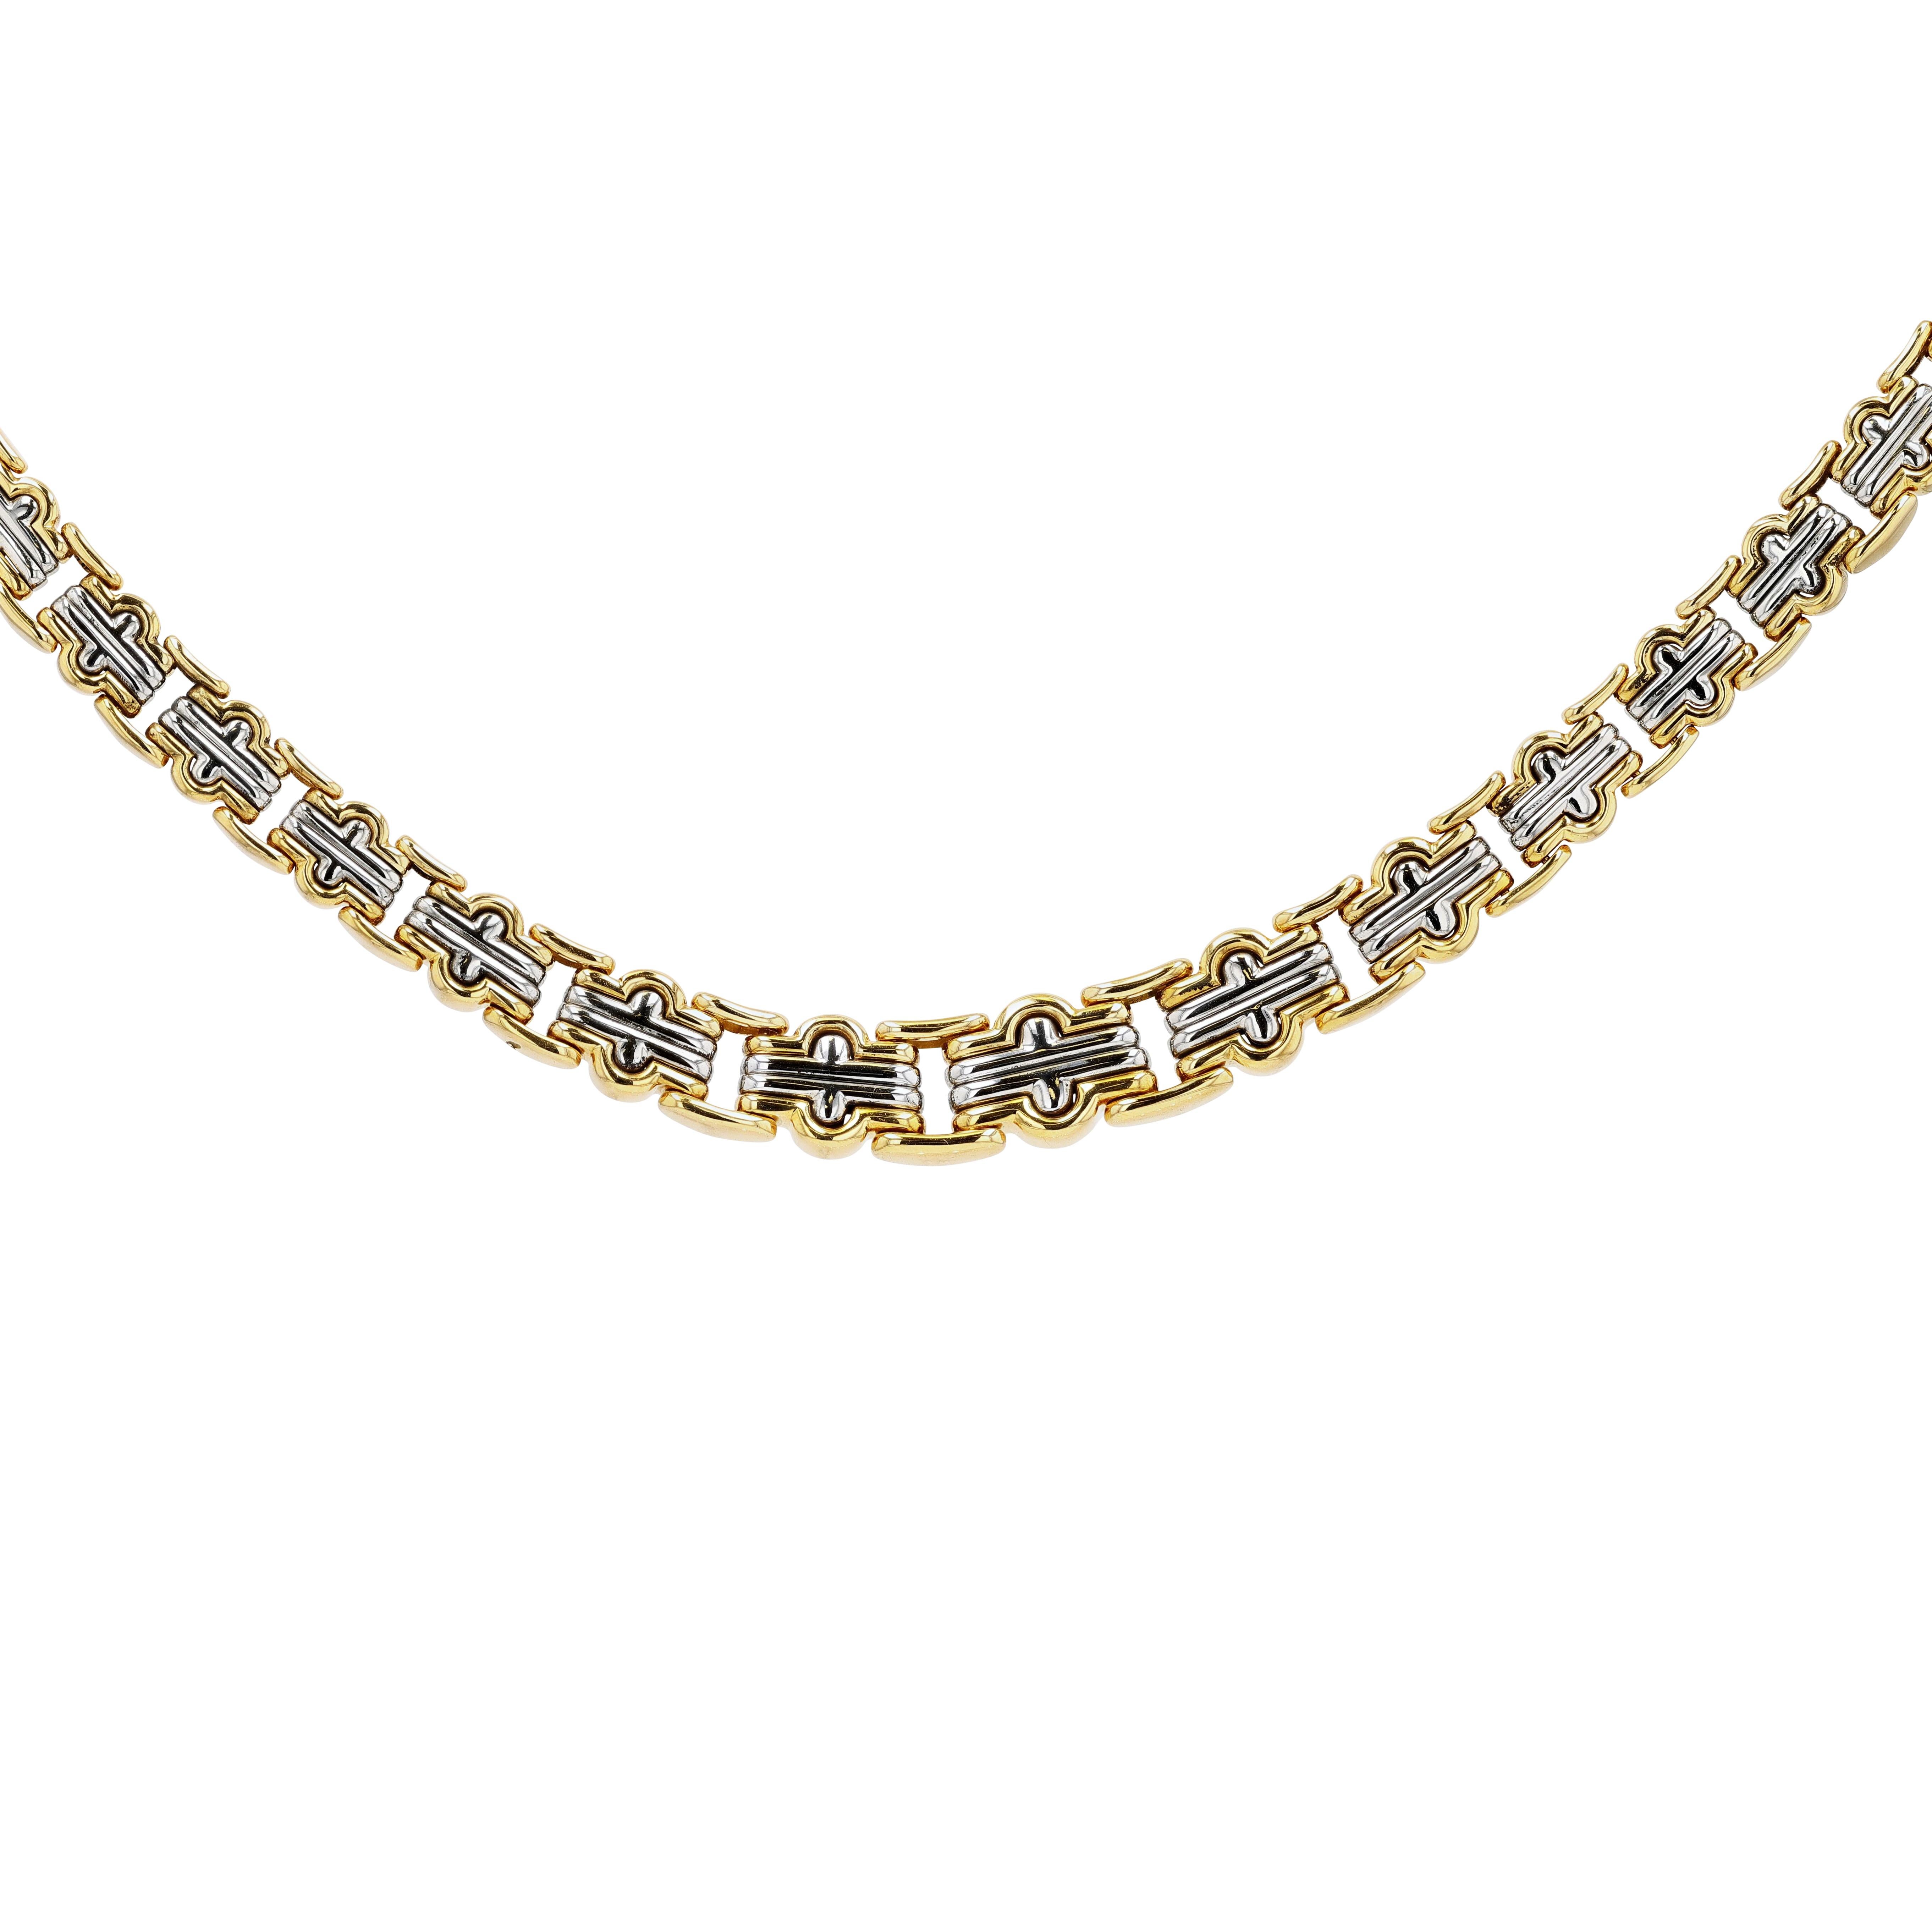 Bulgari Parentessi 18k/SS necklace  In Excellent Condition For Sale In Princeton, NJ